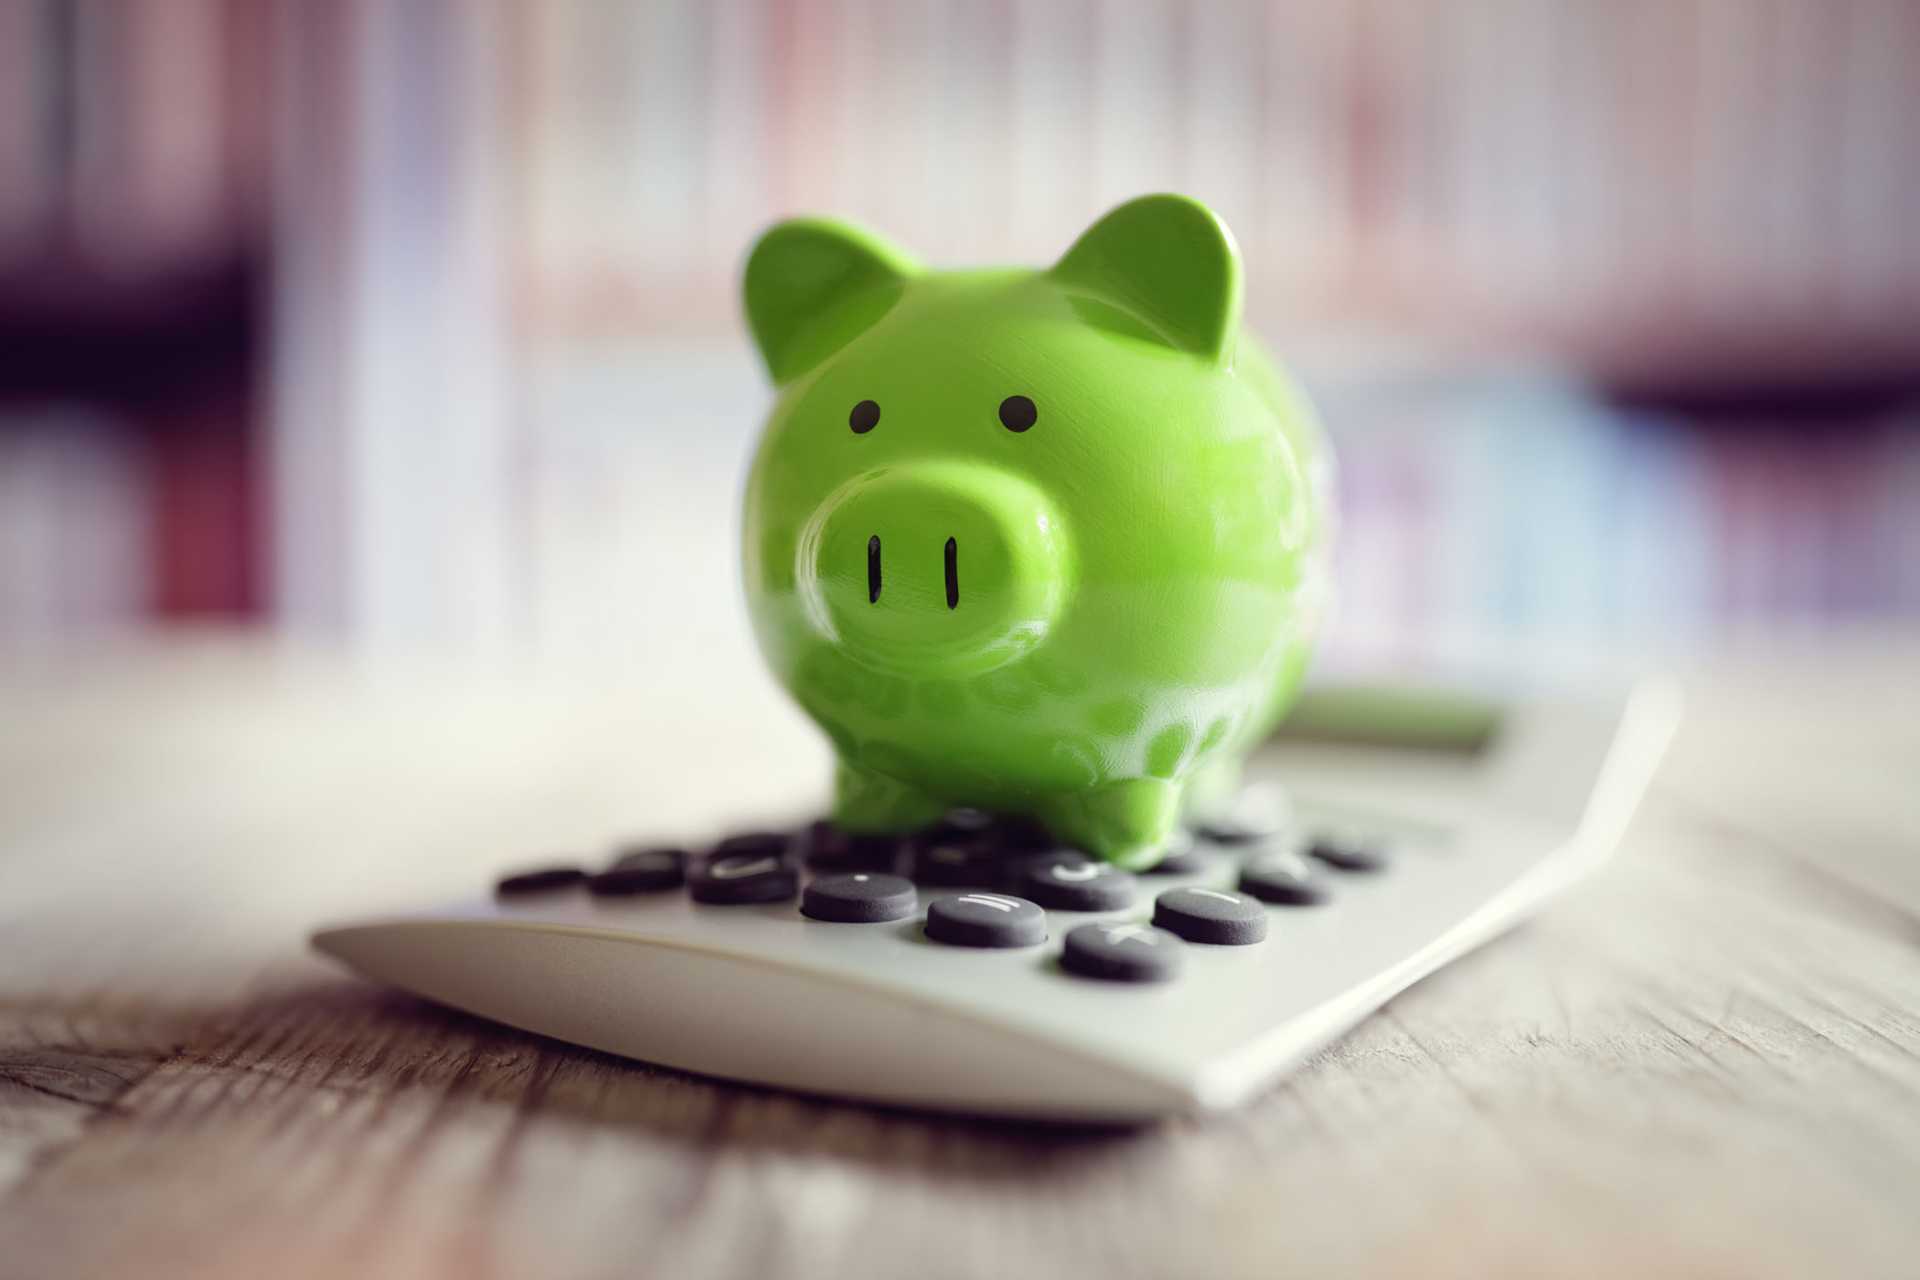 Image of a green piggy bank sitting on a calculator